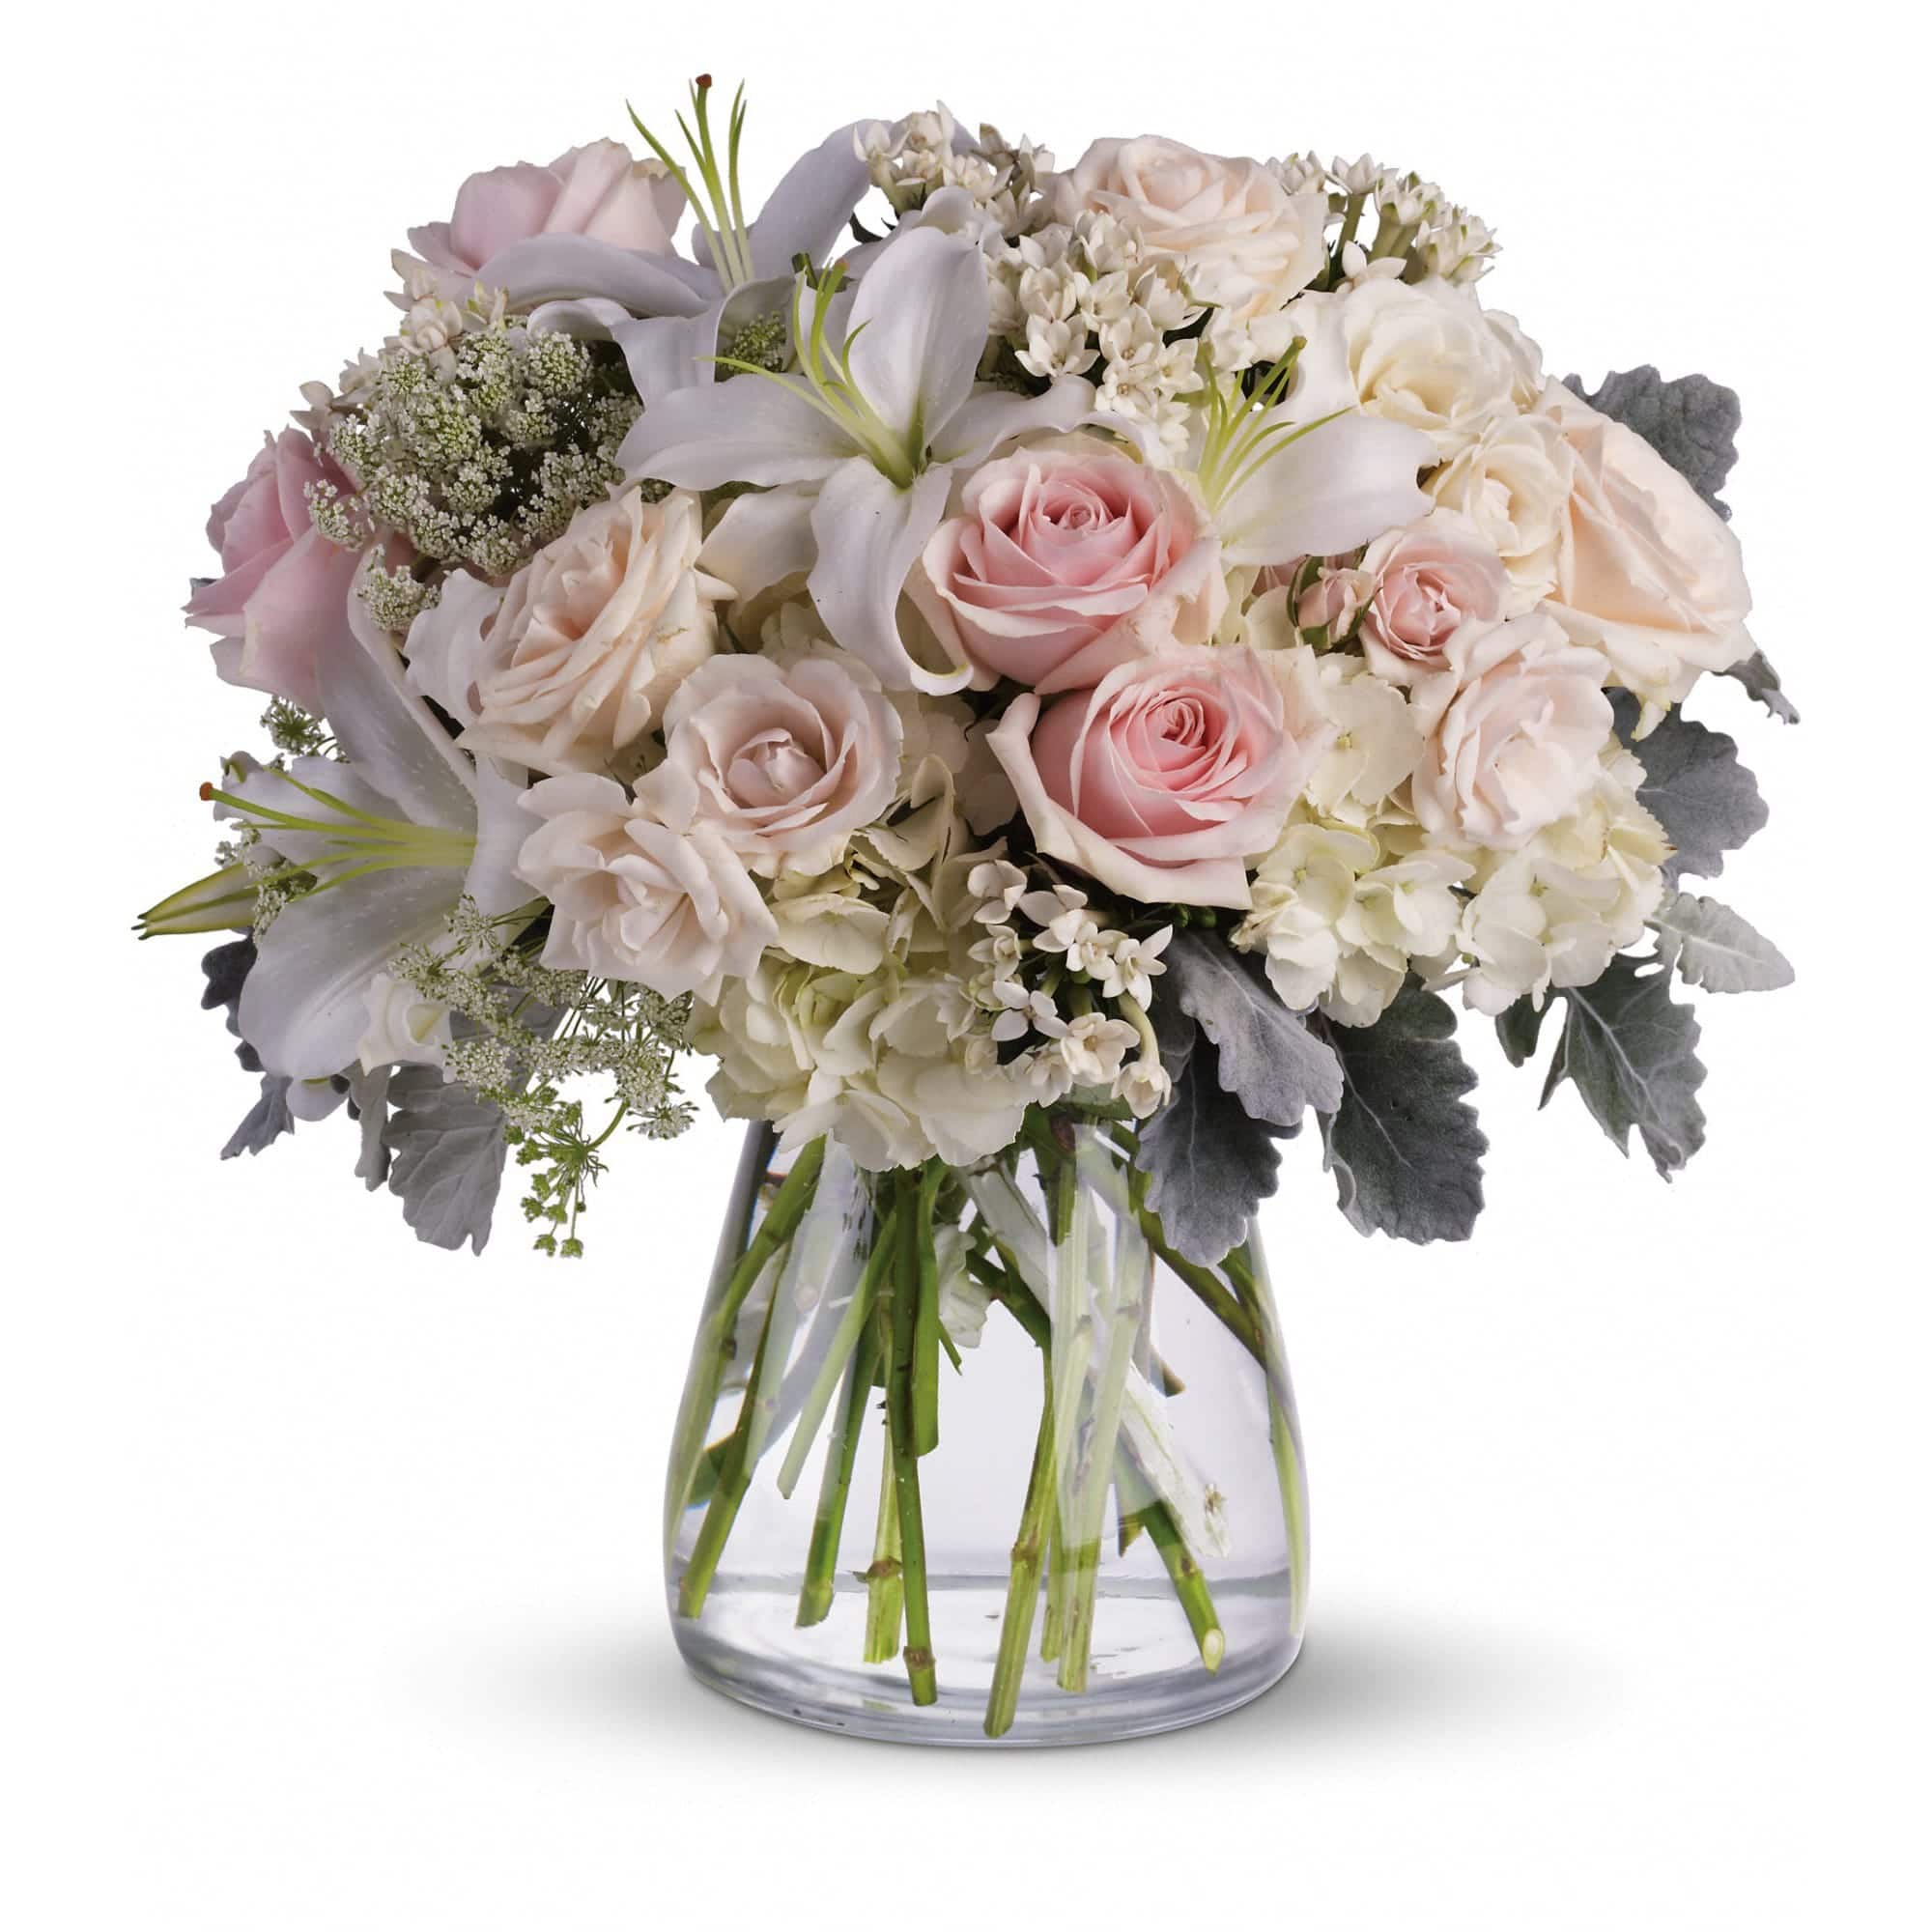 light pink roses, white oriental lilies